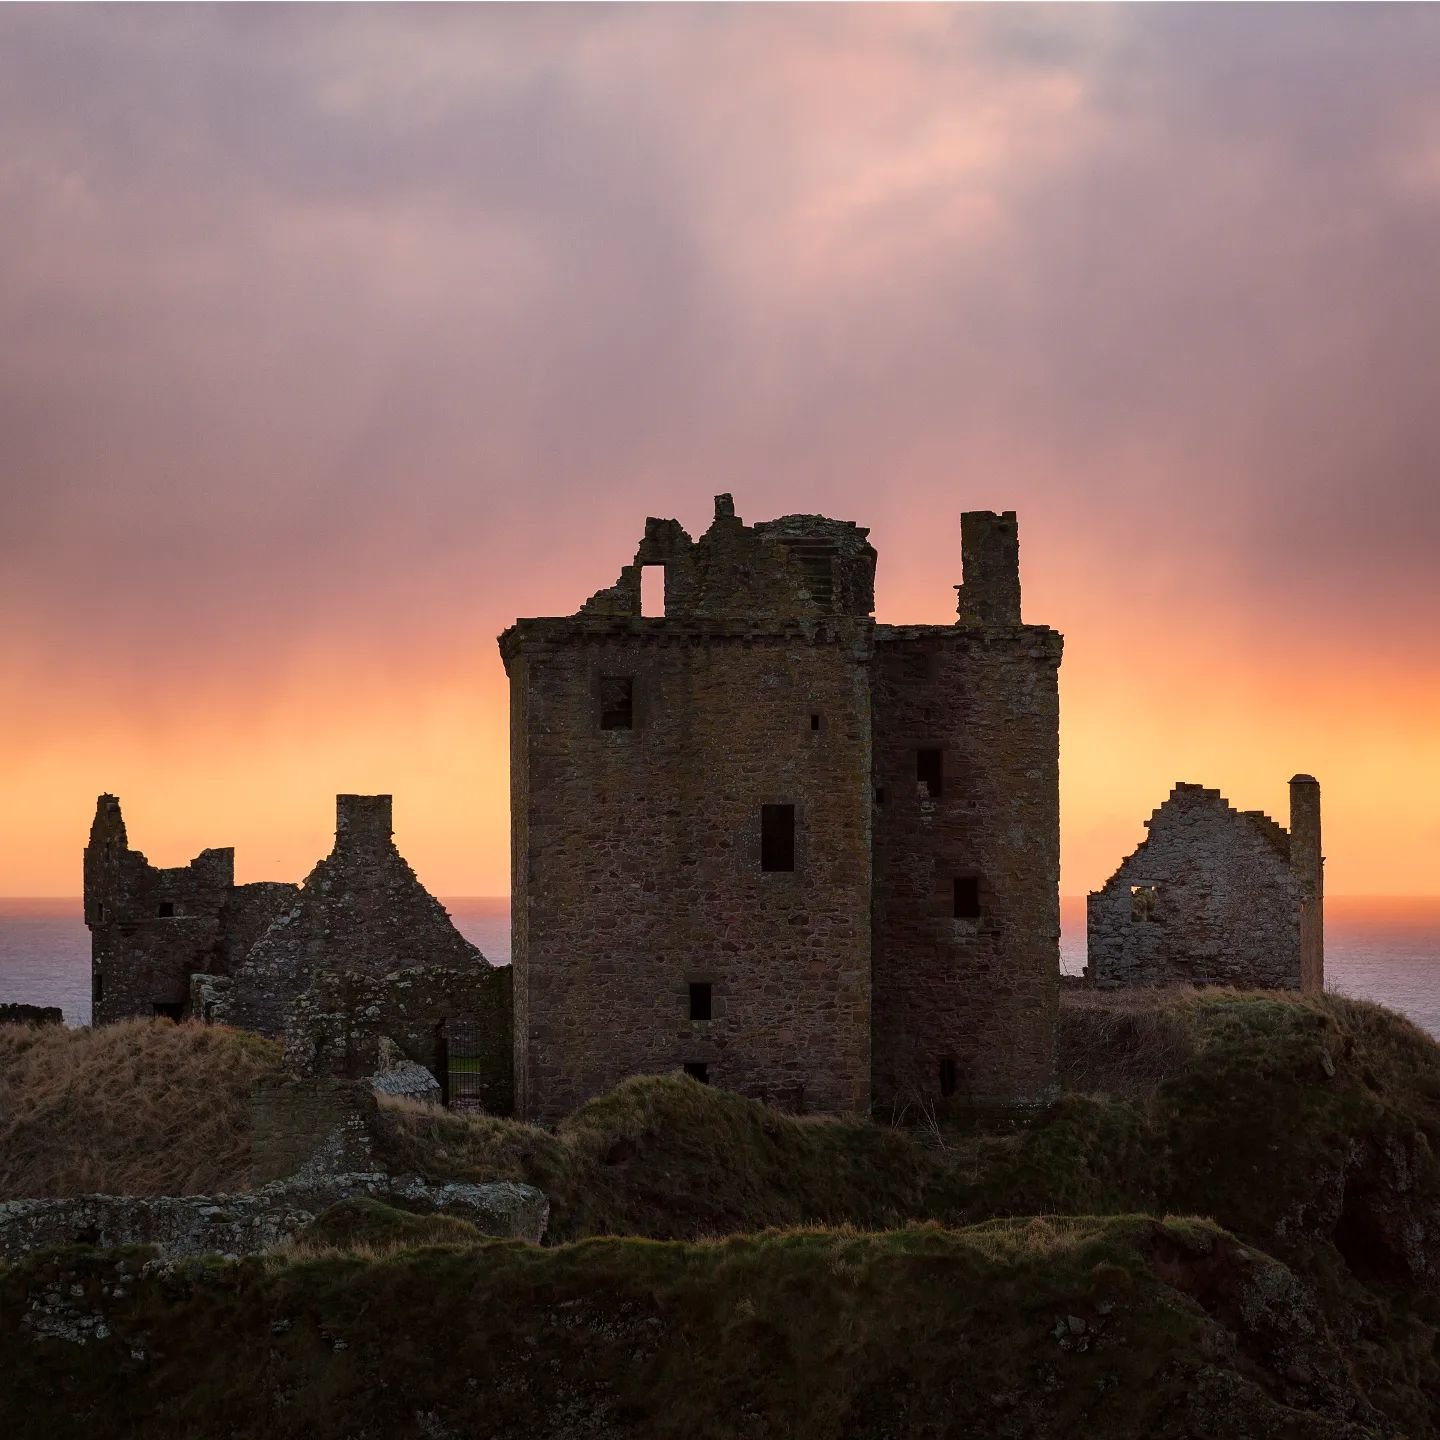 A suitably dramatic location and a beautiful sunrise for the iconic Dunnottar Castle. If you are visiting and the weather looks favourable then I strongly recommend watching the  sun rise with Dunnottar as your backdrop. 

Have you watched the sun ri